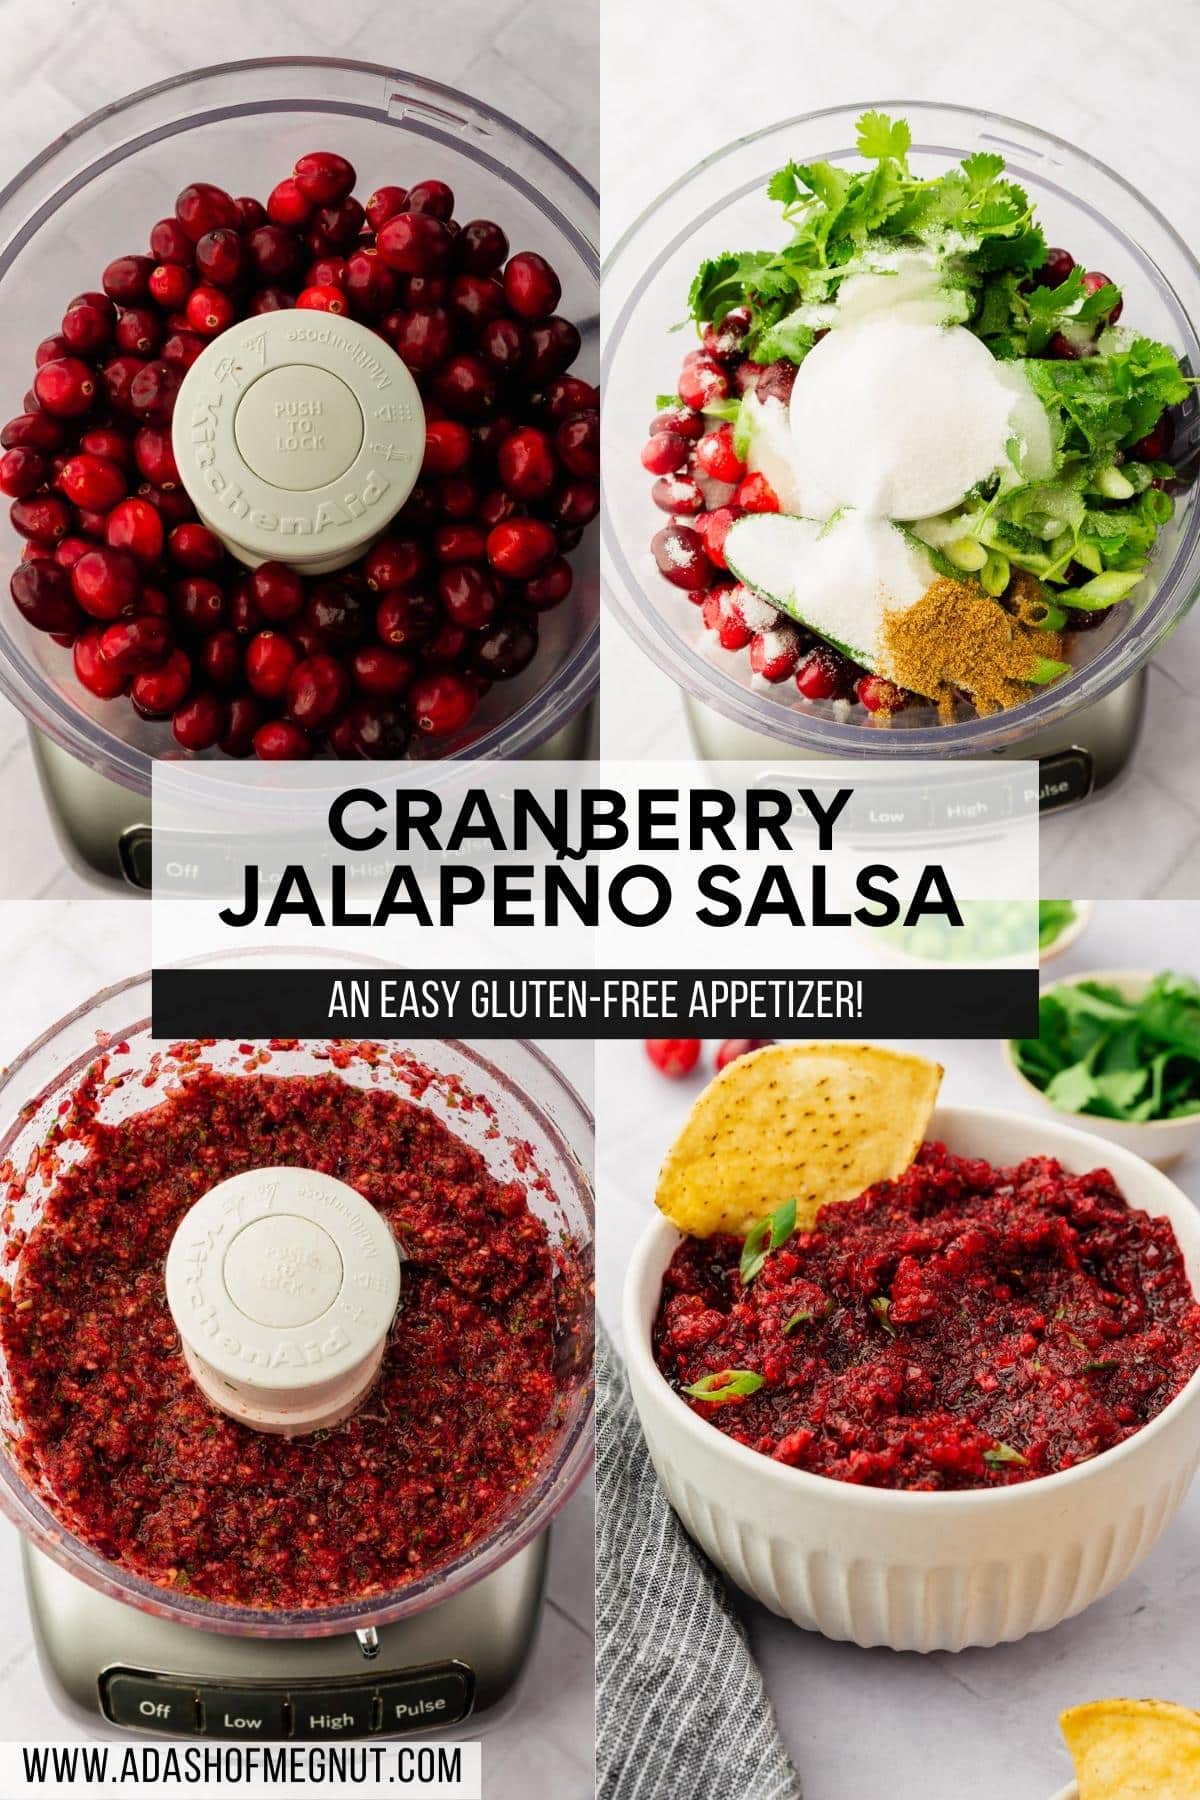 A four photo collage showing the process of making cranberry salsa. Photo 1: A food processor with cranberries in it. Photo 2: A food processor with cranberries, jalapeño, cilantro, green onions, sugar, cumin and lime juice. Photo 3: A food processor with cranberry jalapeño salsa in it that has been pulsed until finely chopped. Photo 4: A bowl of cranberry salsa topped with green onion with a tortilla chip in it.